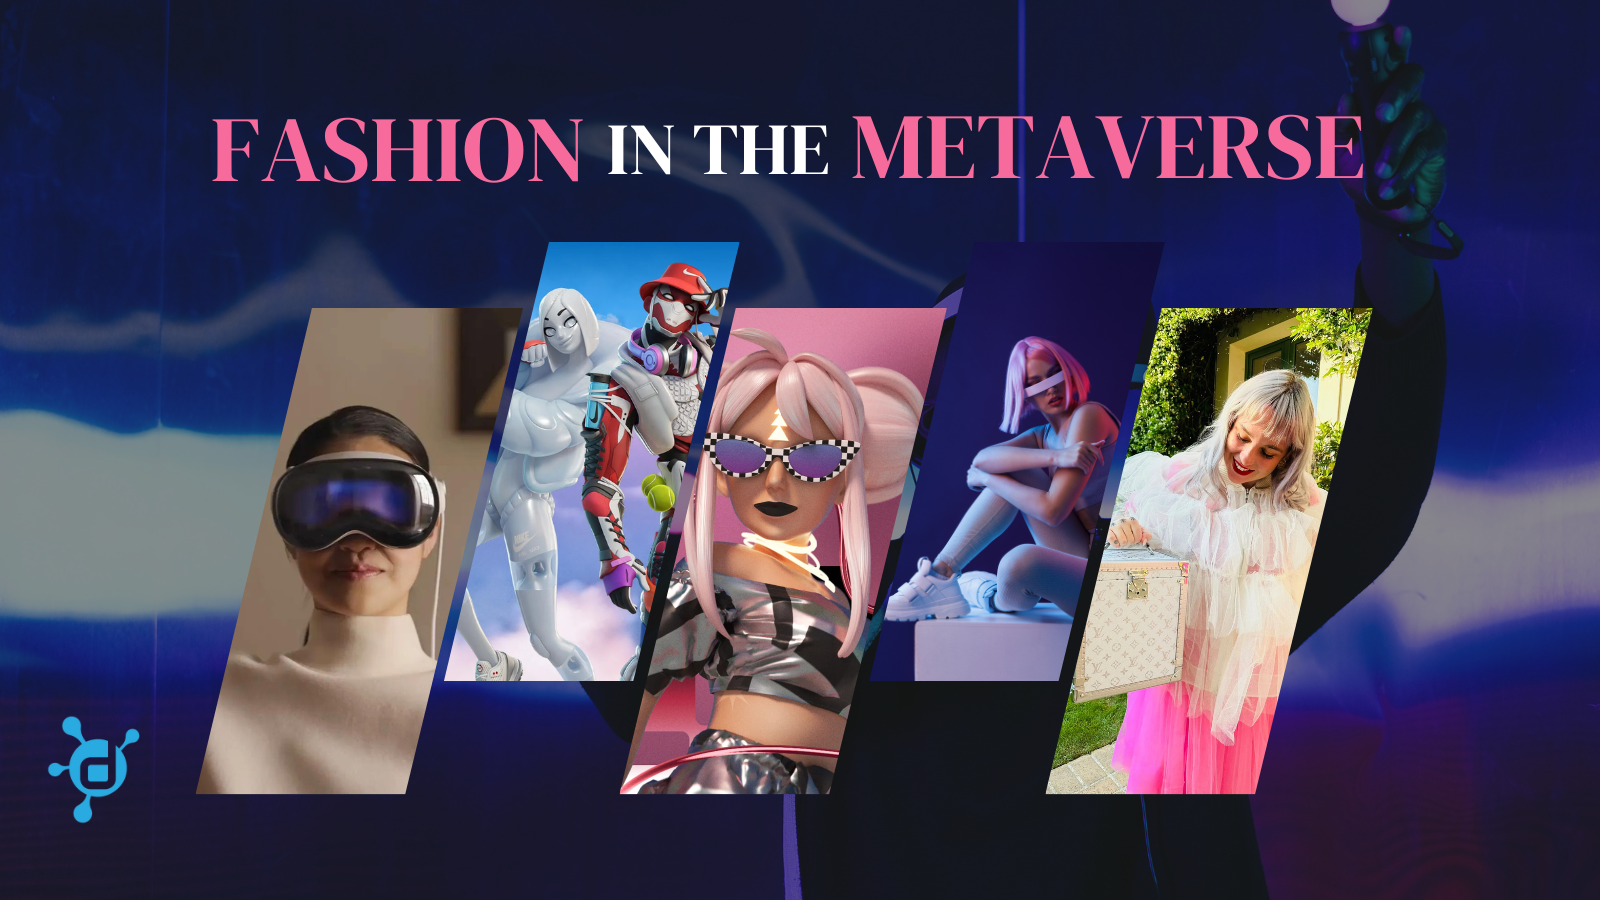 Luxury Fashion Brands Are Already Making Millions in the Metaverse